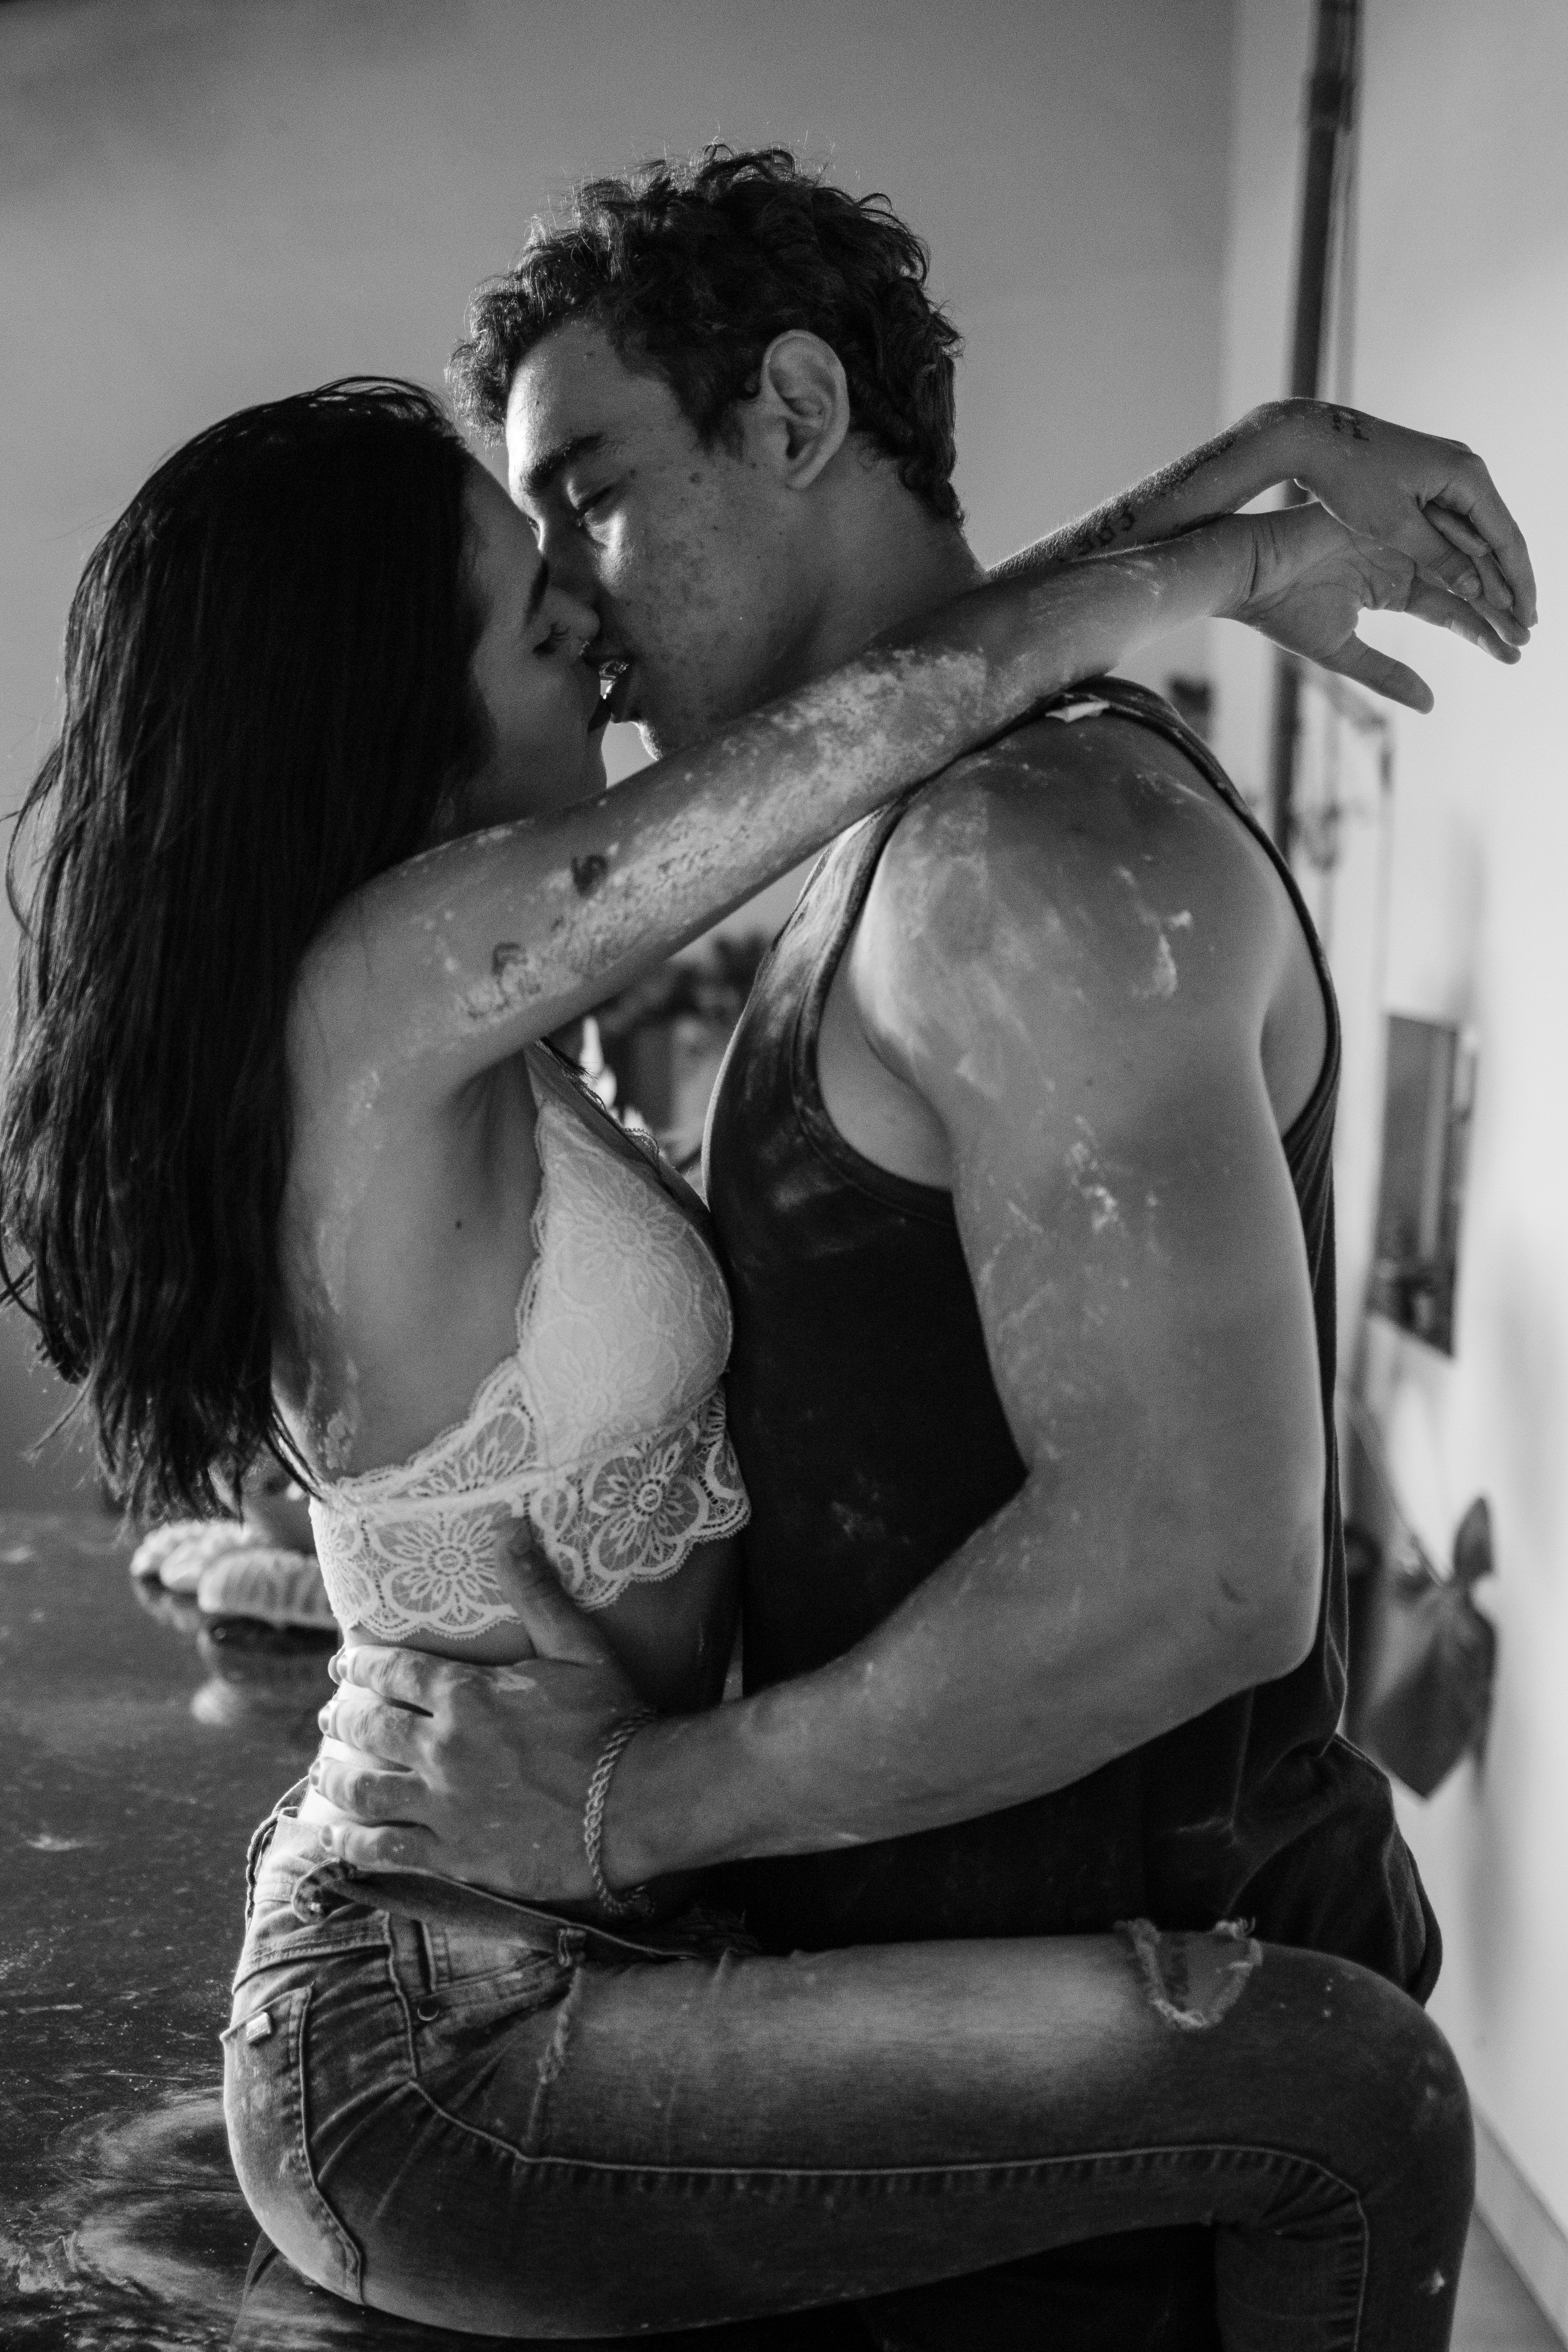 A couple kissing with paint all over them. | Source: Pexels